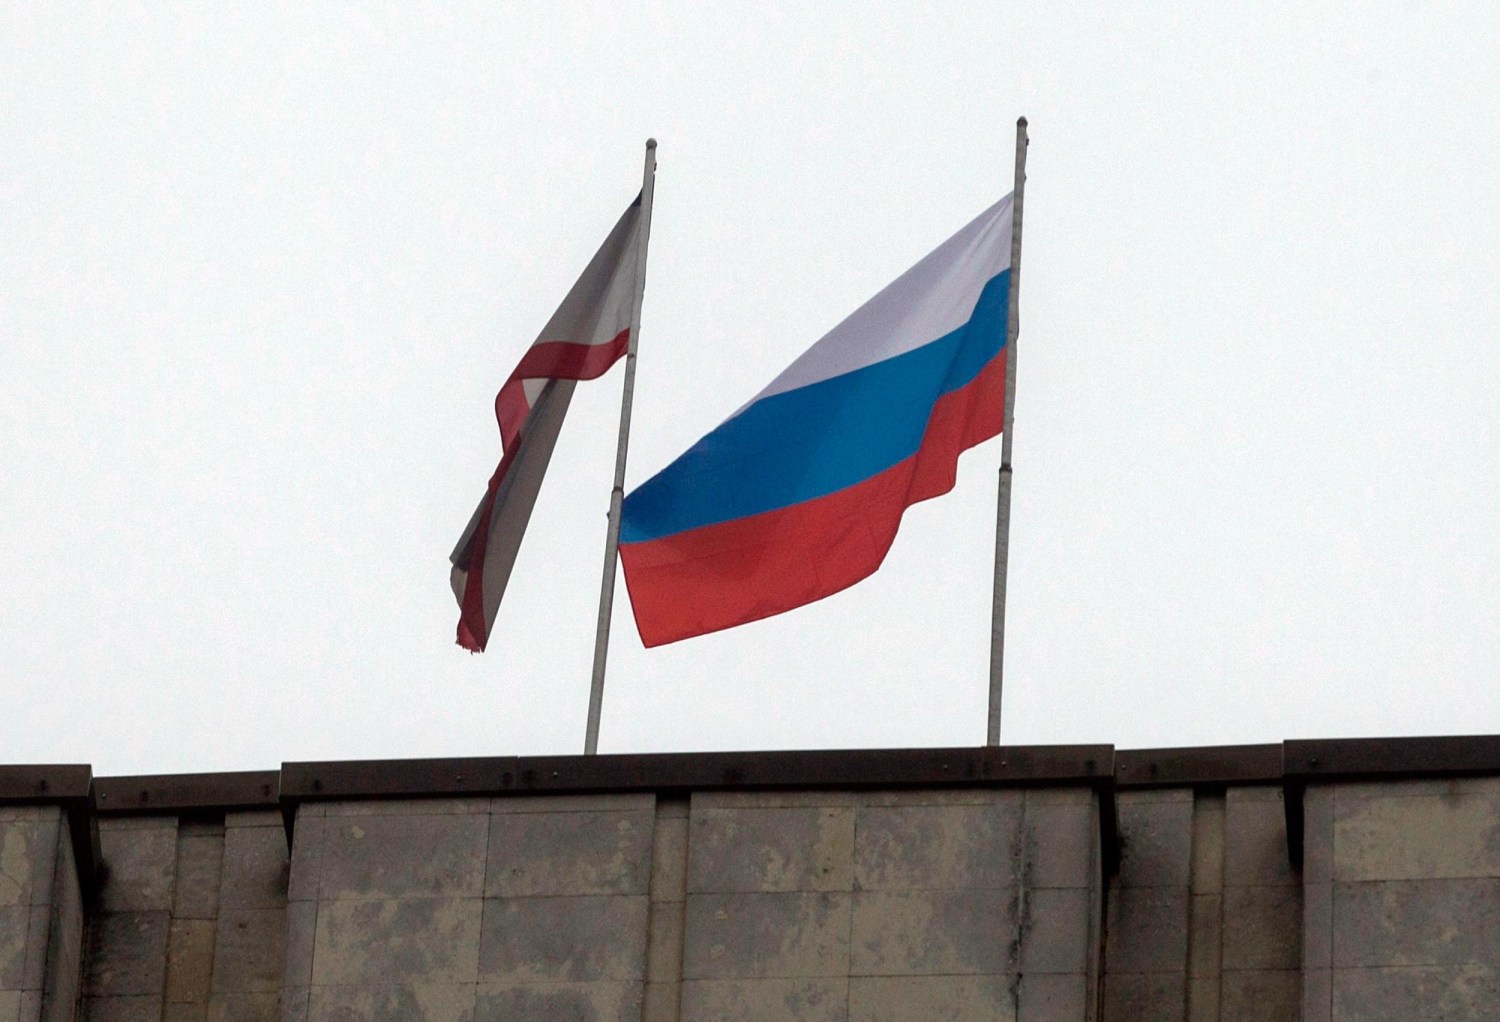 The Russian flag keeps getting stolen from the parkway. Now